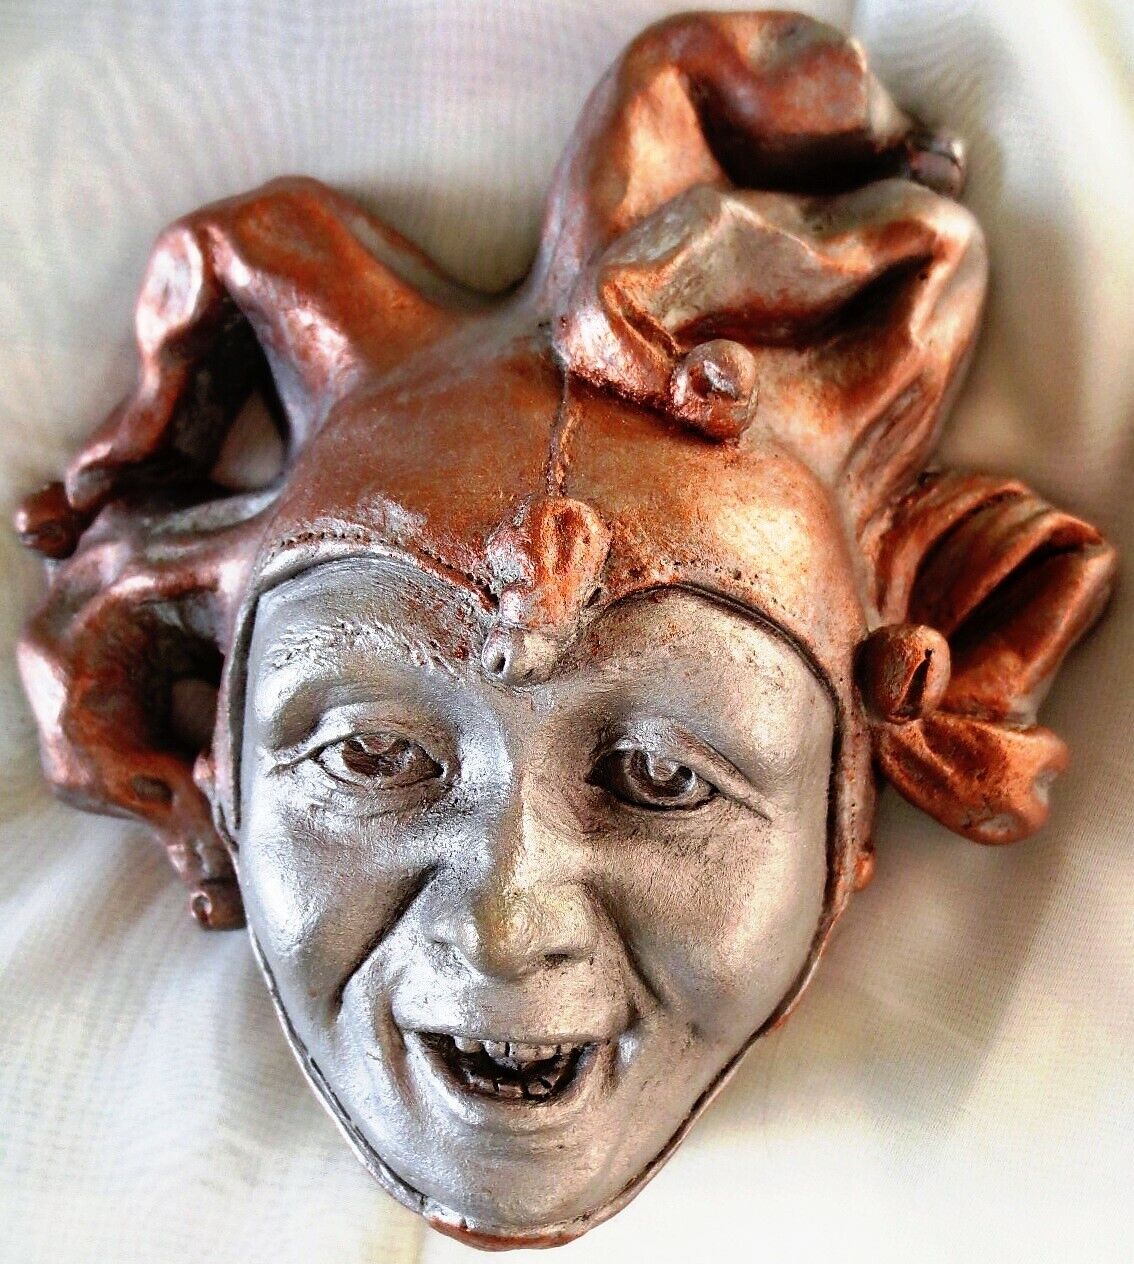 Happy Handmade Jester Wall Sculpture, A Fool With One Job: to Make You Smile